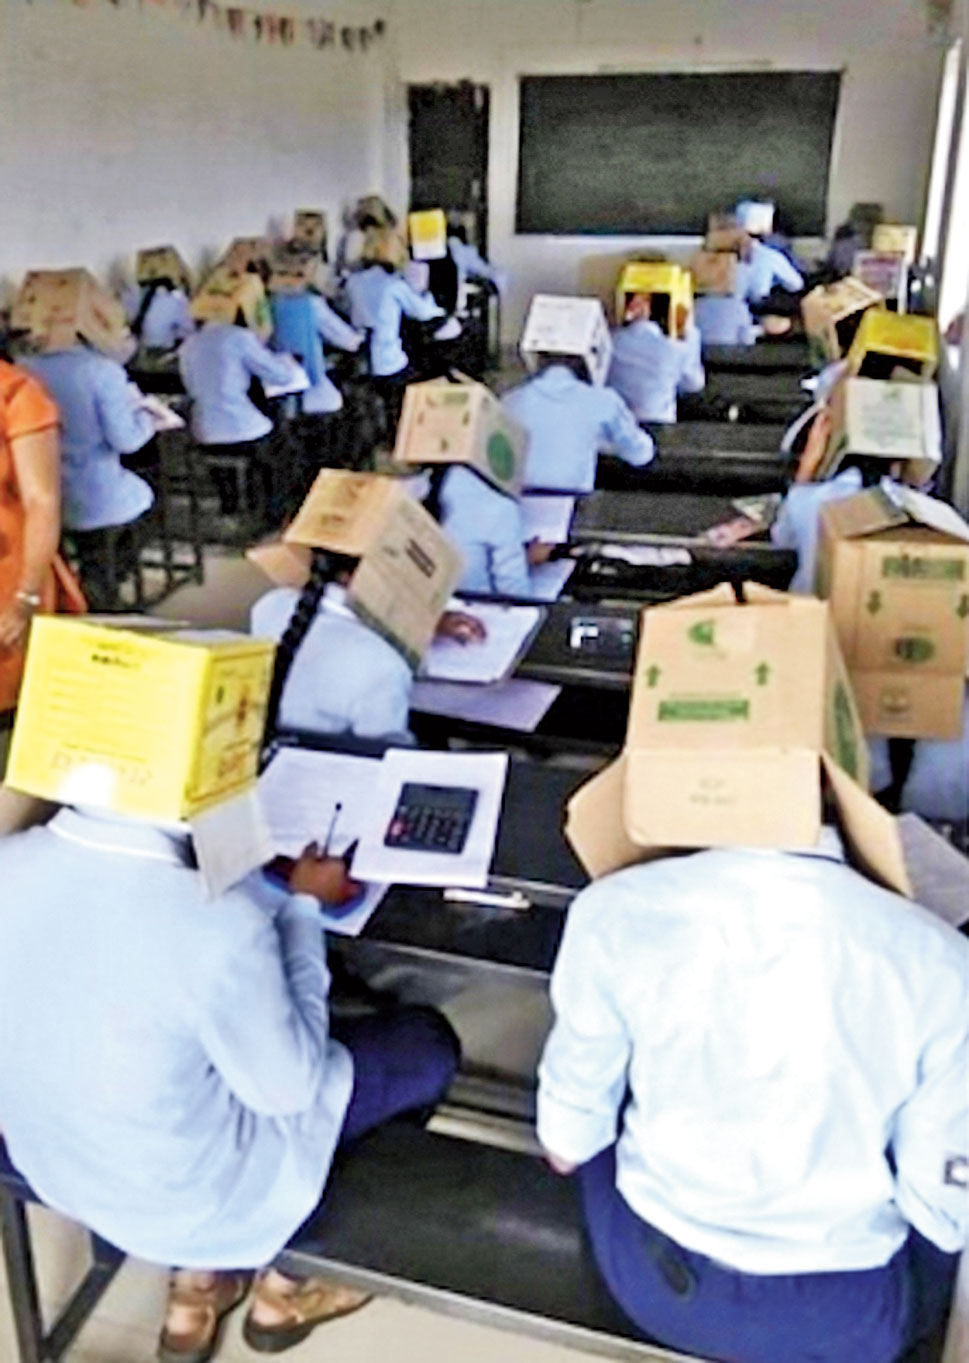 The students write the exam covering their heads with cartons in Haveri